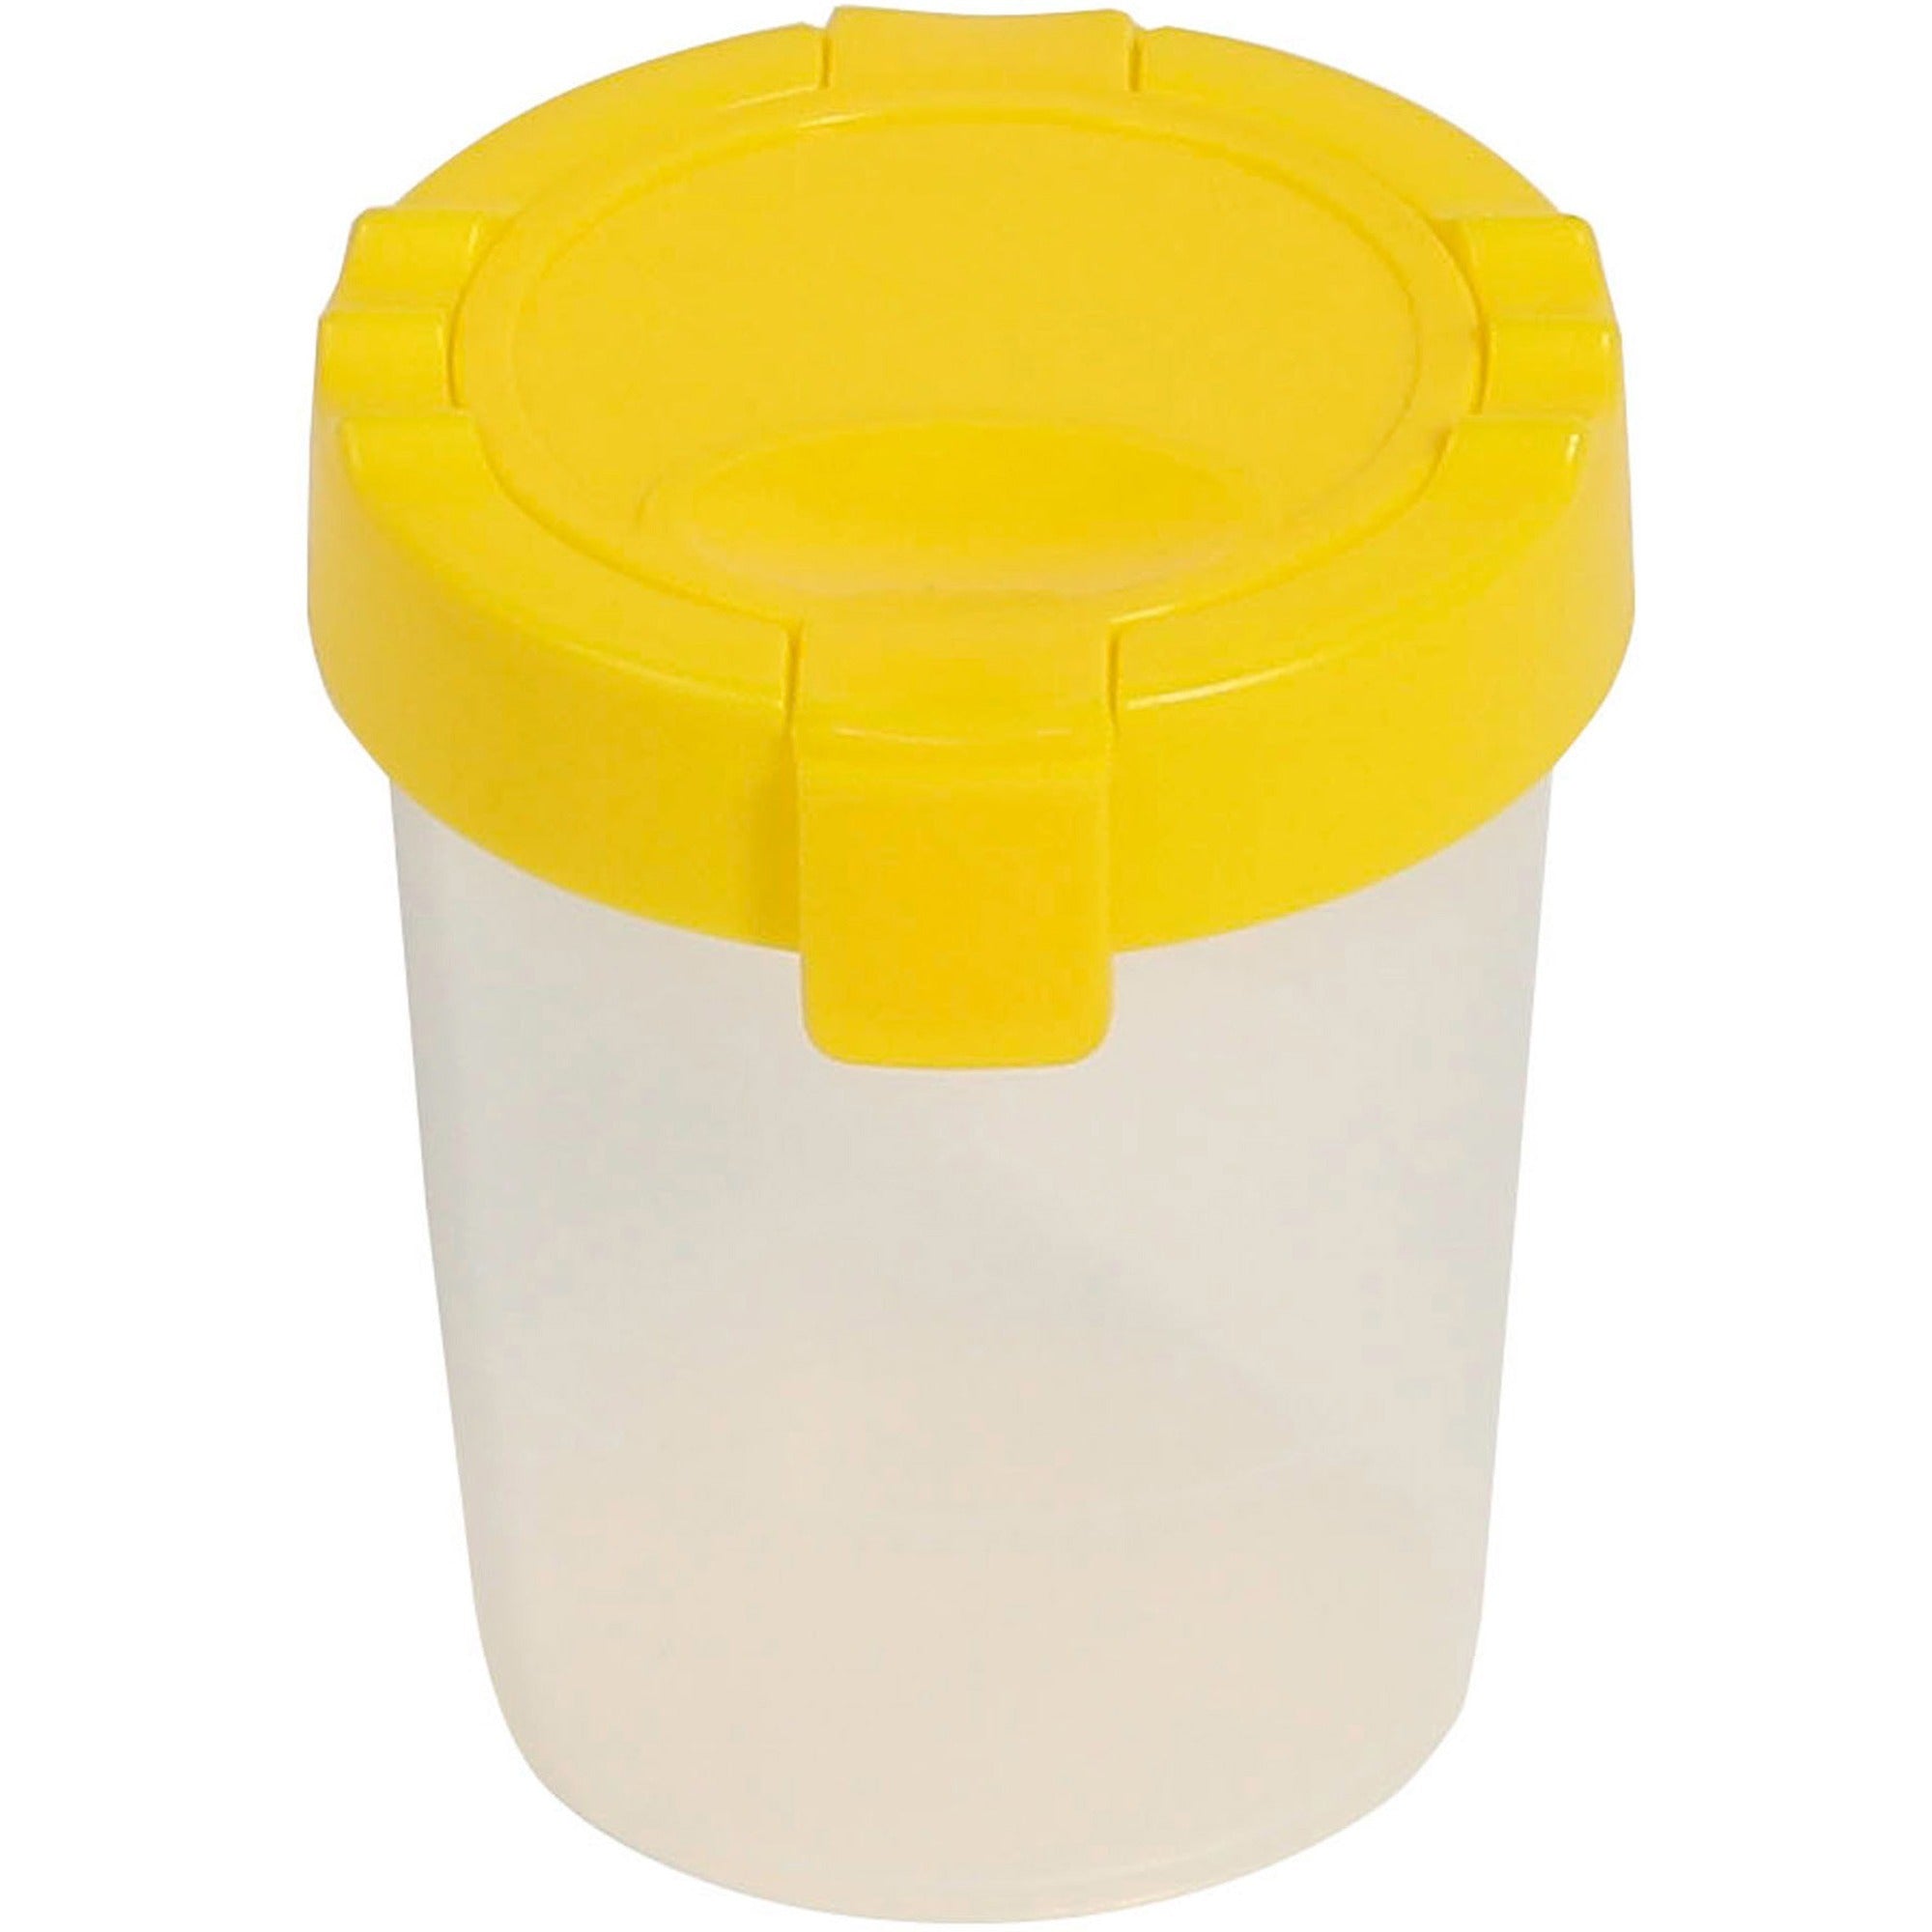 deflecto-antimicrobial-kids-no-spill-paint-cup-yellow-paint-brush-393height-x-346width-x-393depth-1-each-yellow-plastic-polypropylene_def39515yel - 2